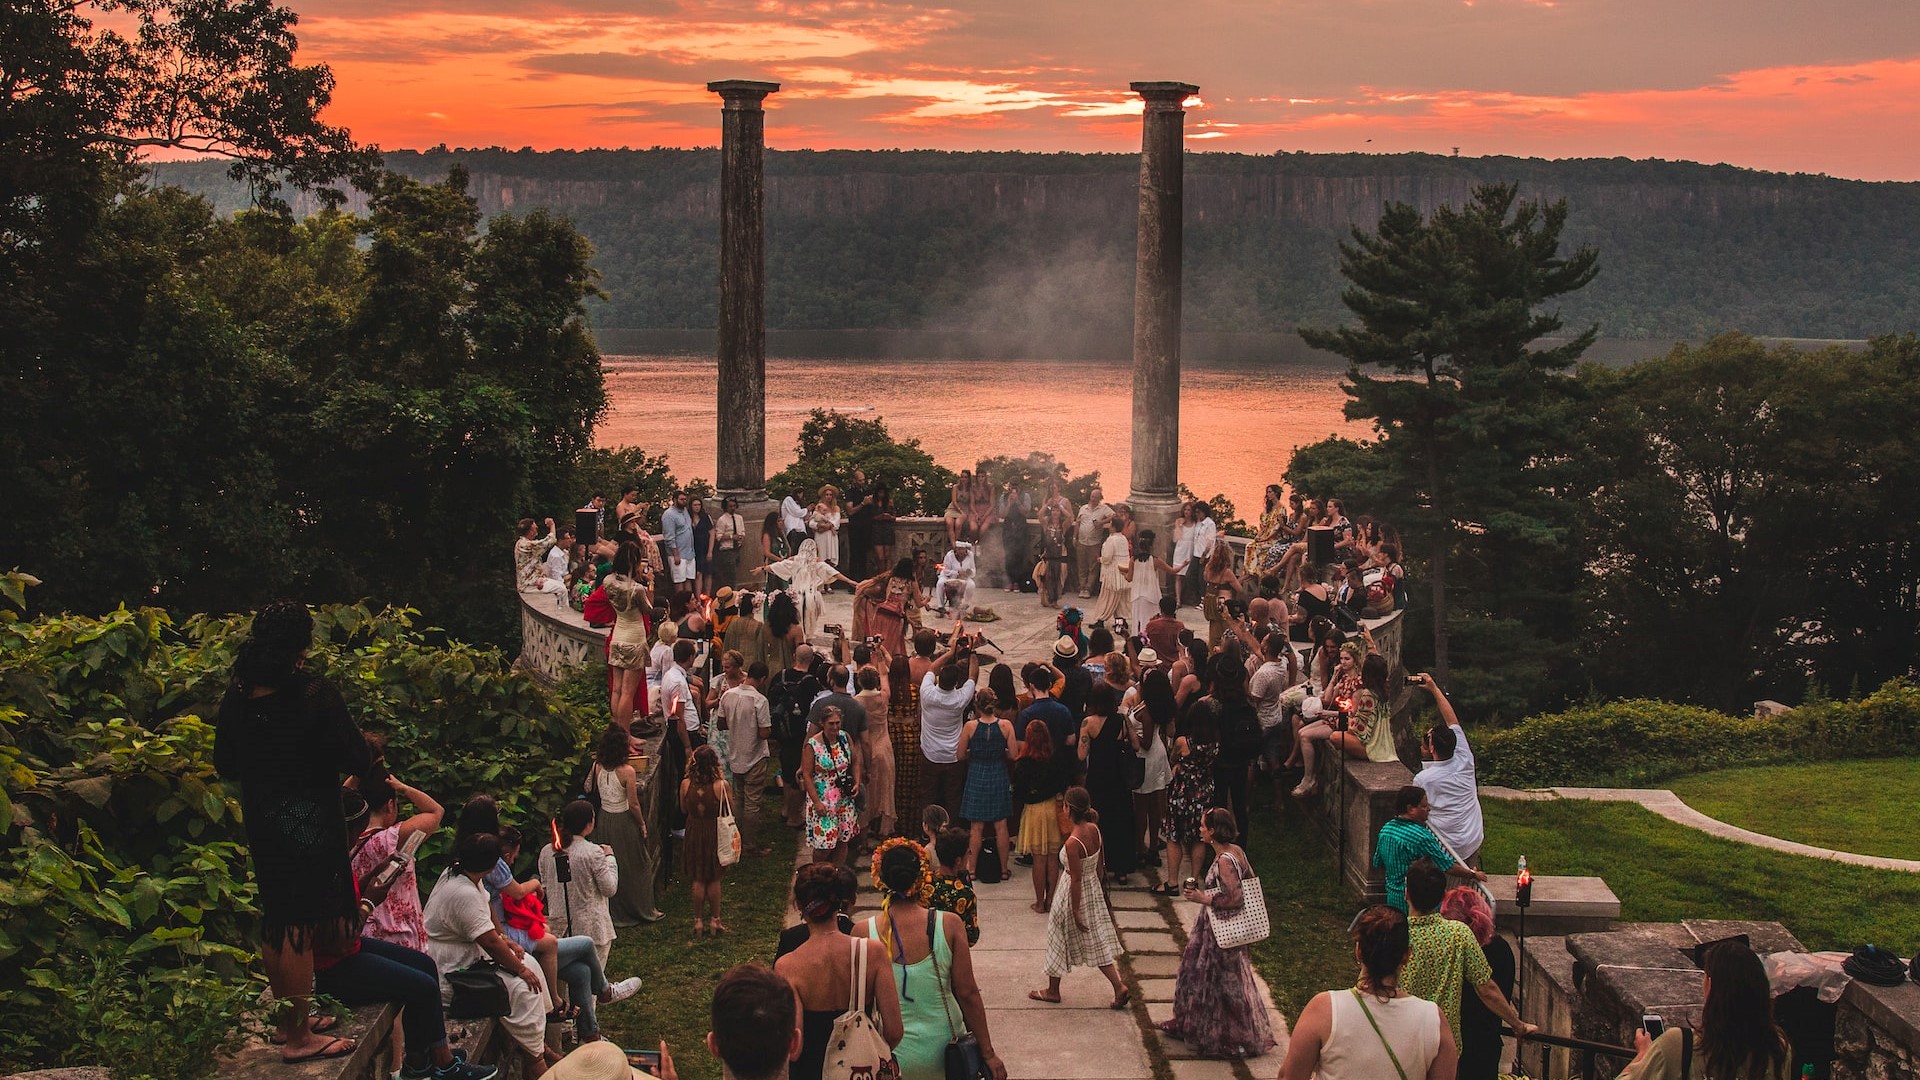 Atlas Obscura's Great Forgotten Garden Party at Untermyer Park and Gardens in Yonkers, NY | Goodwill Car Donations